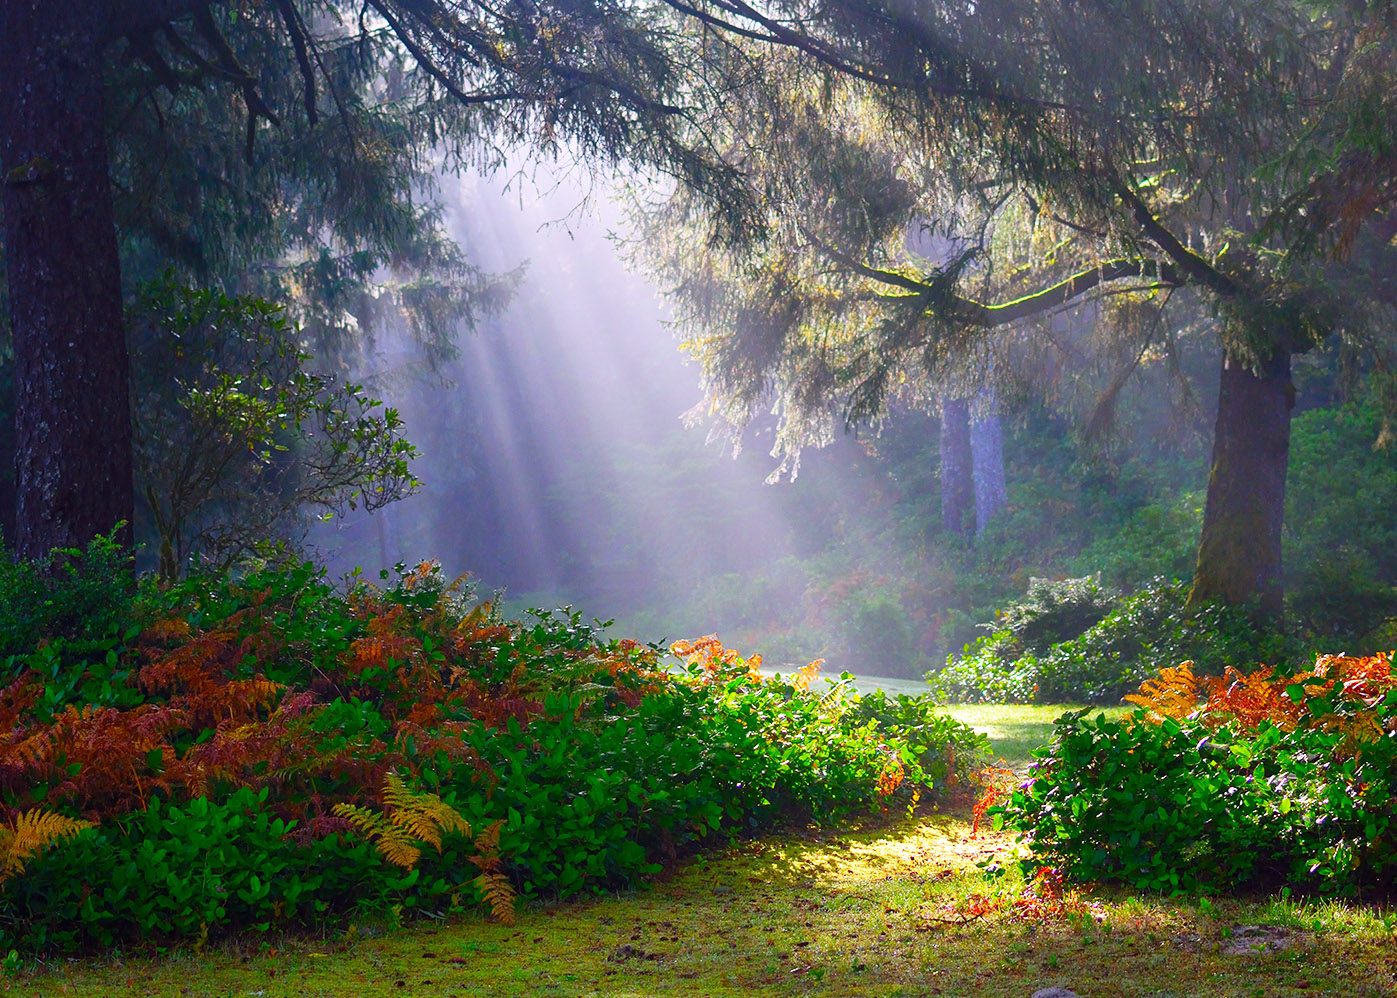 Image of a sunbeam in a park-like setting